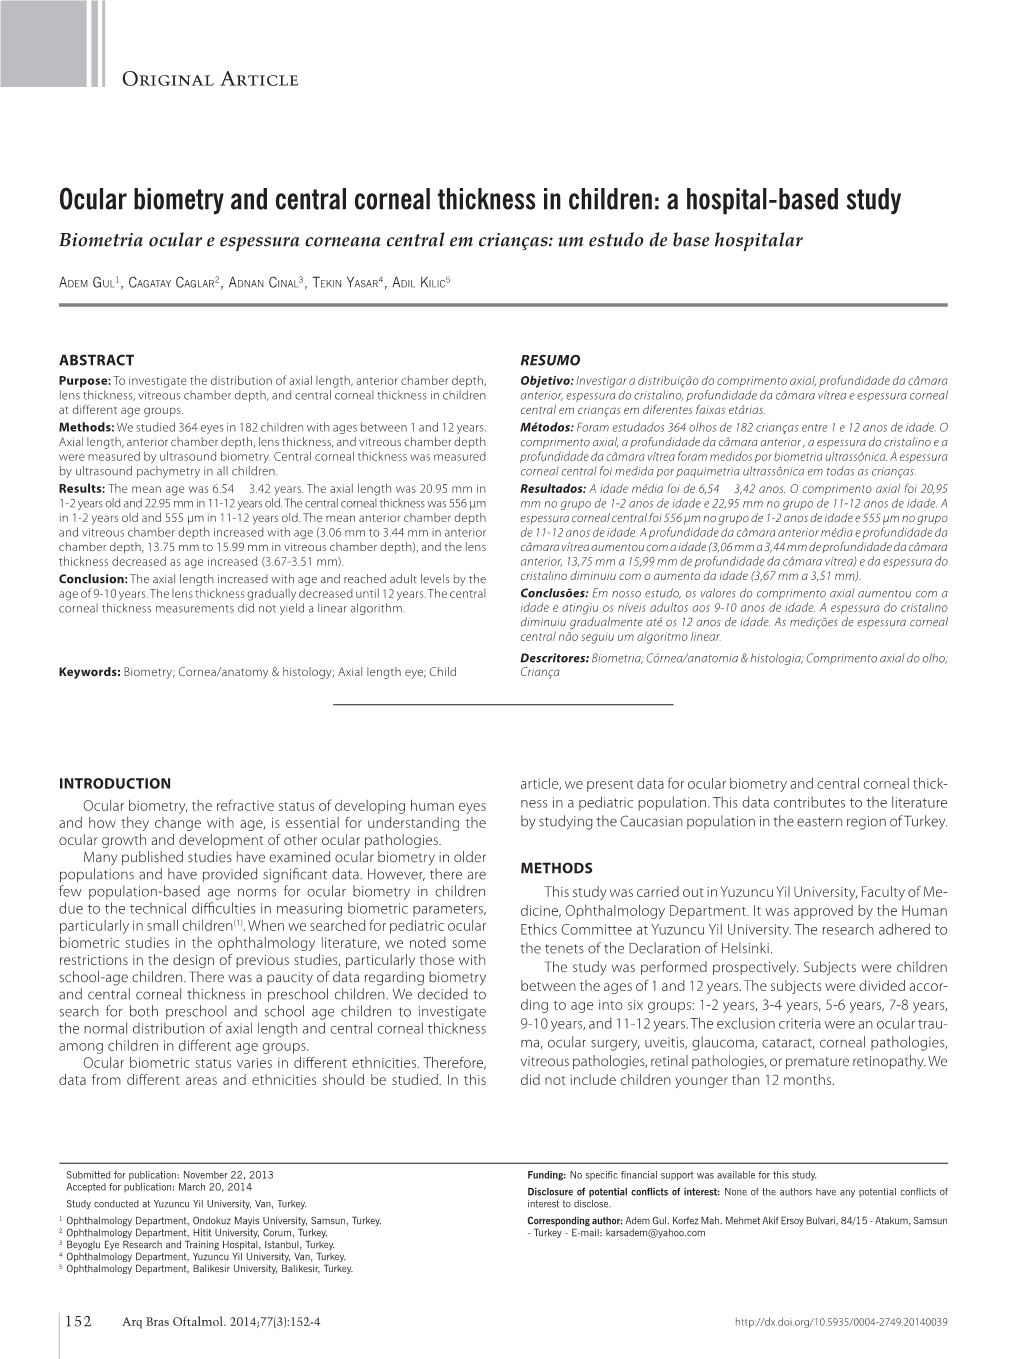 Ocular Biometry and Central Corneal Thickness in Children